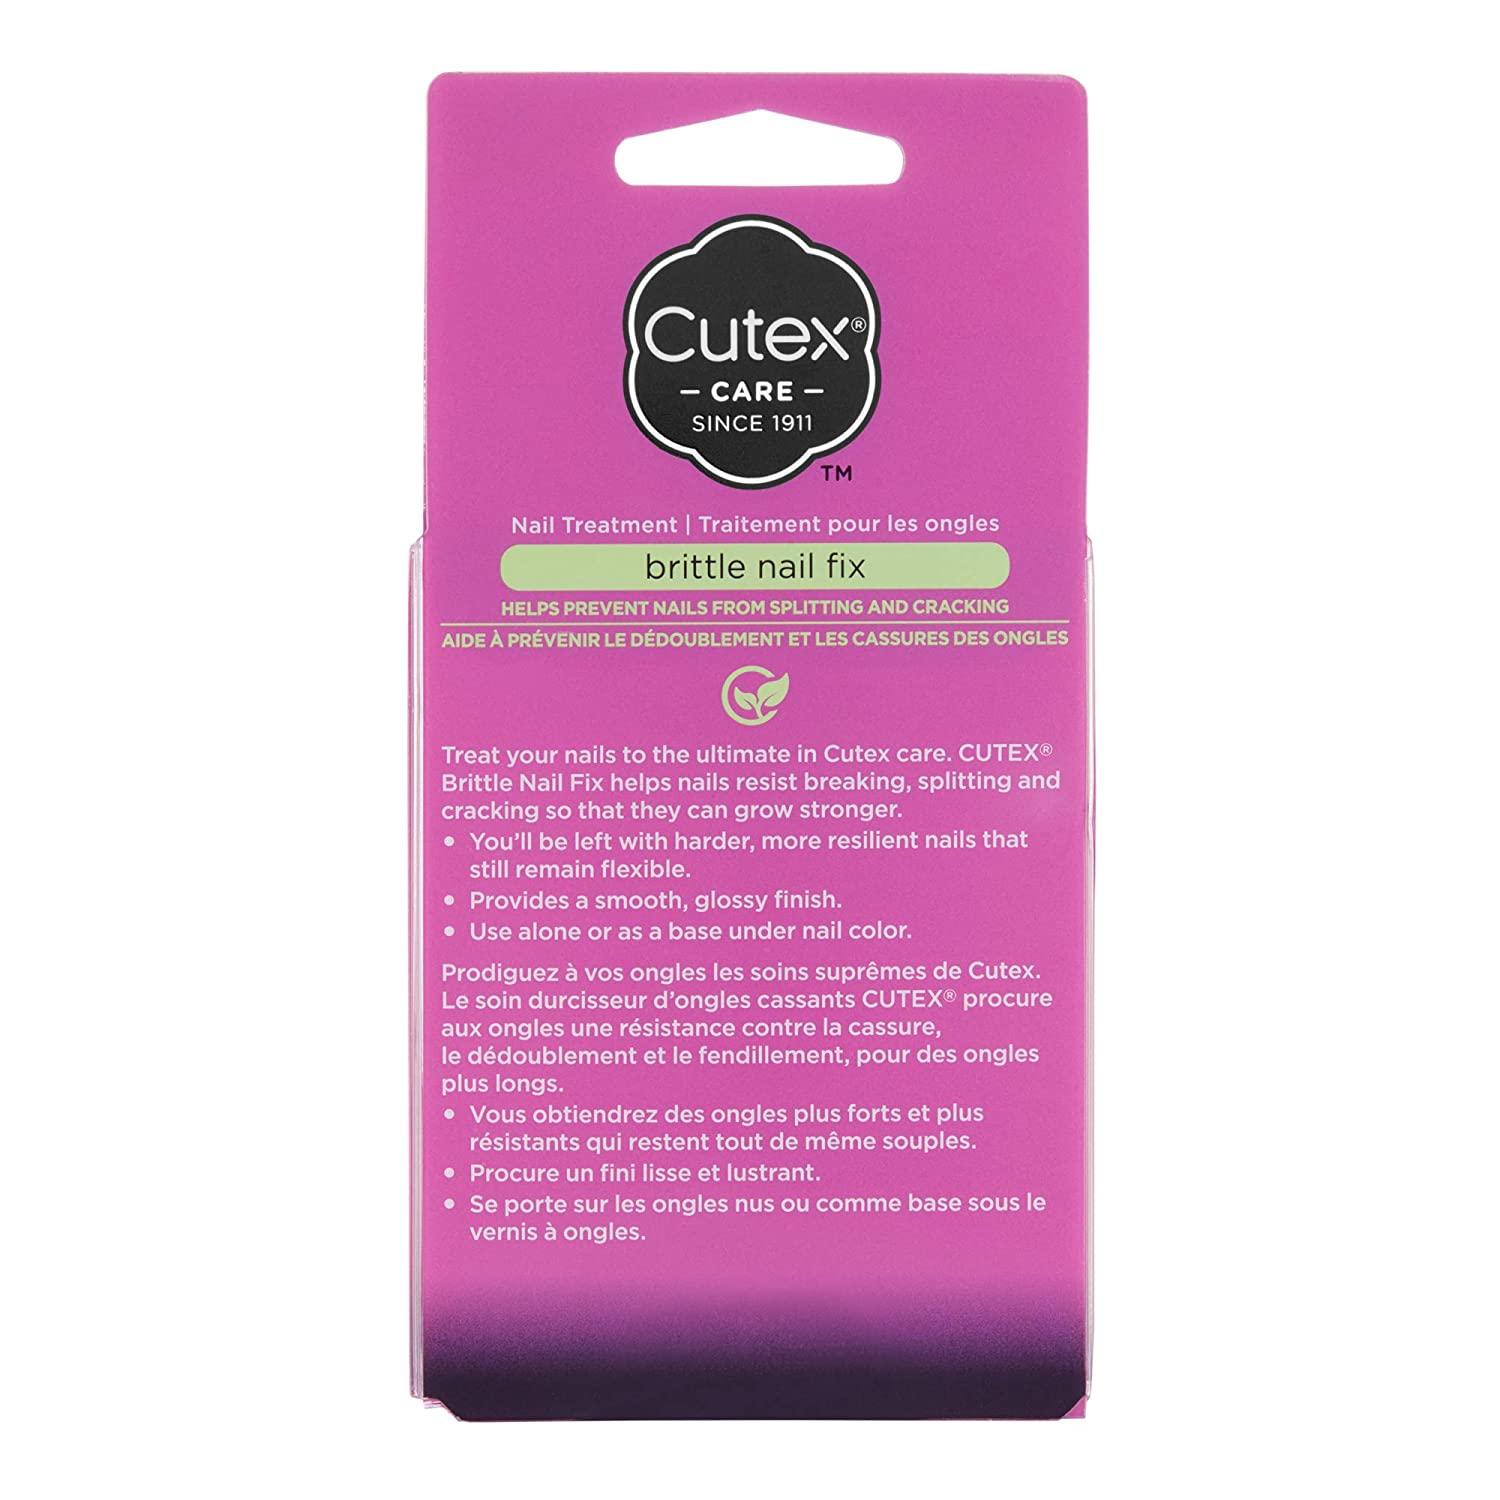 Cutex Care Swipe & Go Nail Polish Remover Pads 10 Count - Gen C Beauty